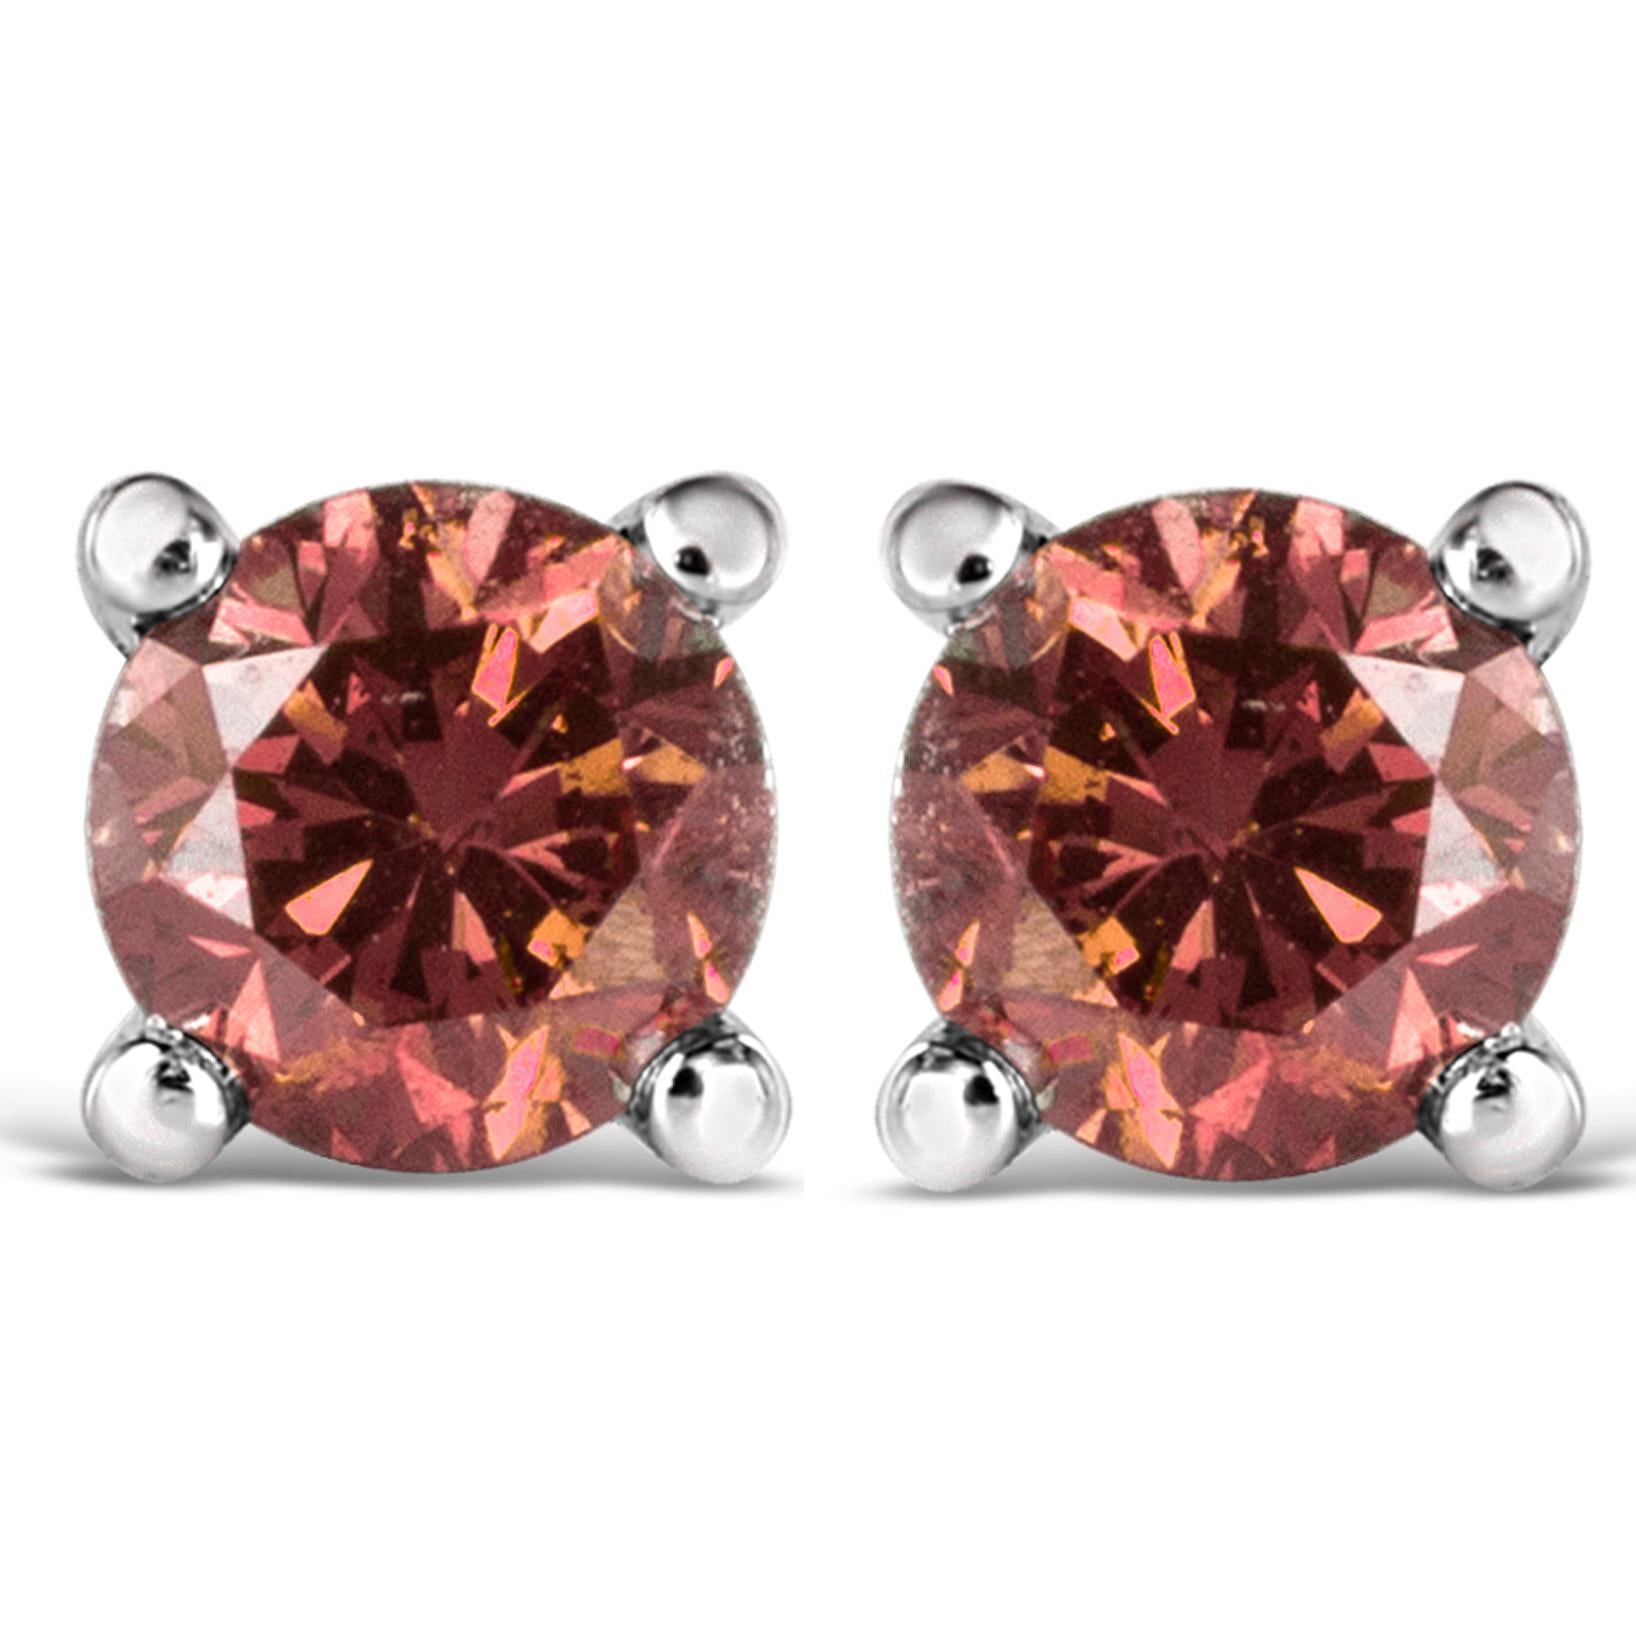 Celebrate any occasion with these classic shimmering solitaire diamond stud earrings. Fashioned in genuine 14k White Gold, each earring showcases a sparkling color treated round cut diamond solitaire. The 2 round, color treated diamonds radiate a